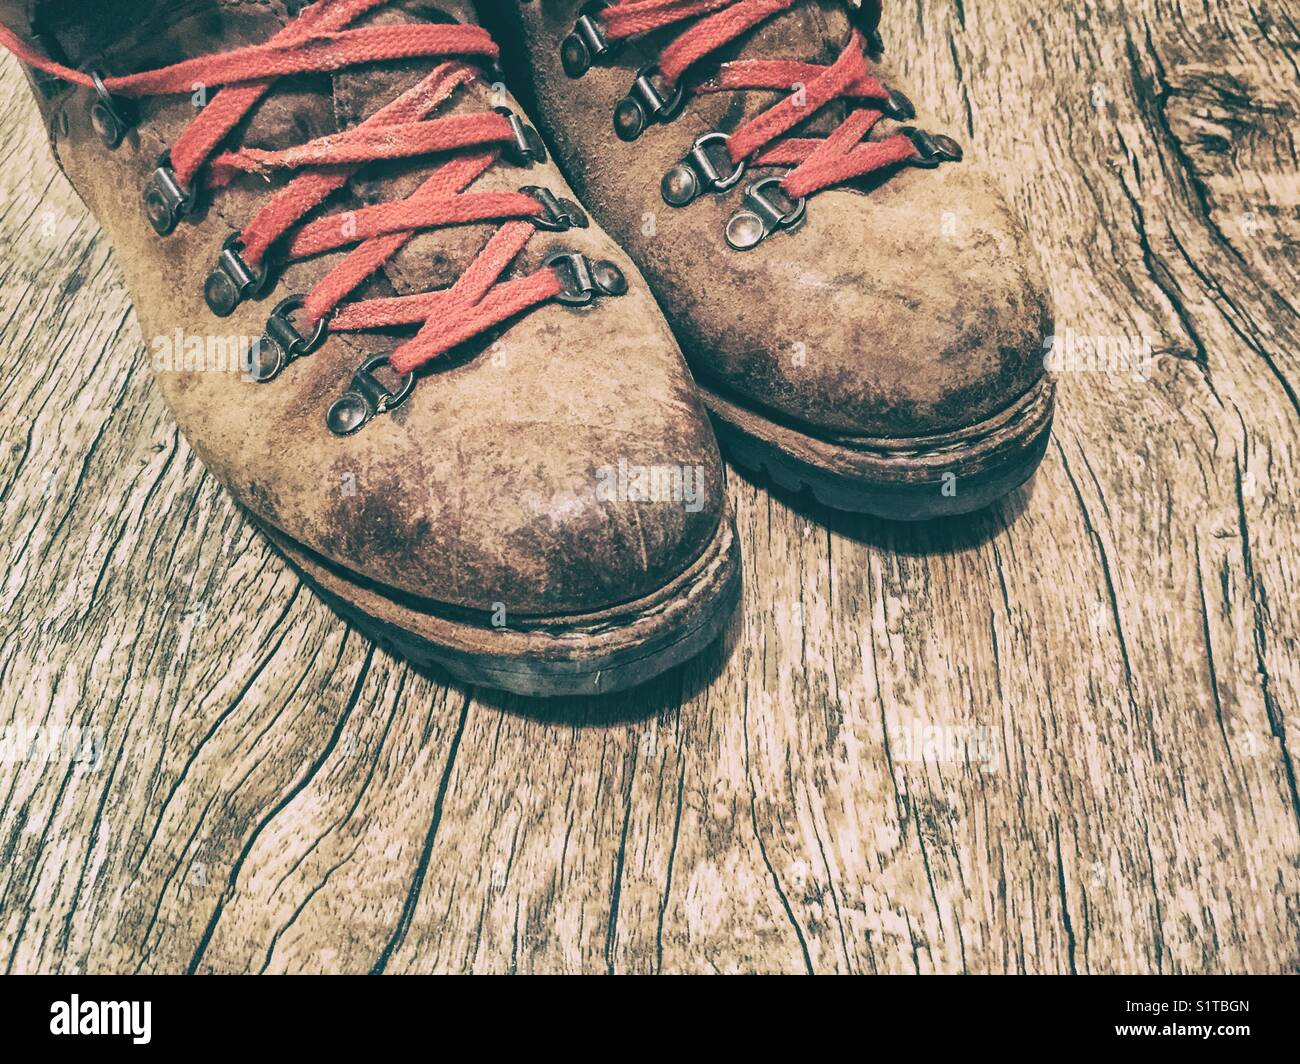 A pair of old hiking boots with red laces Stock Photo - Alamy